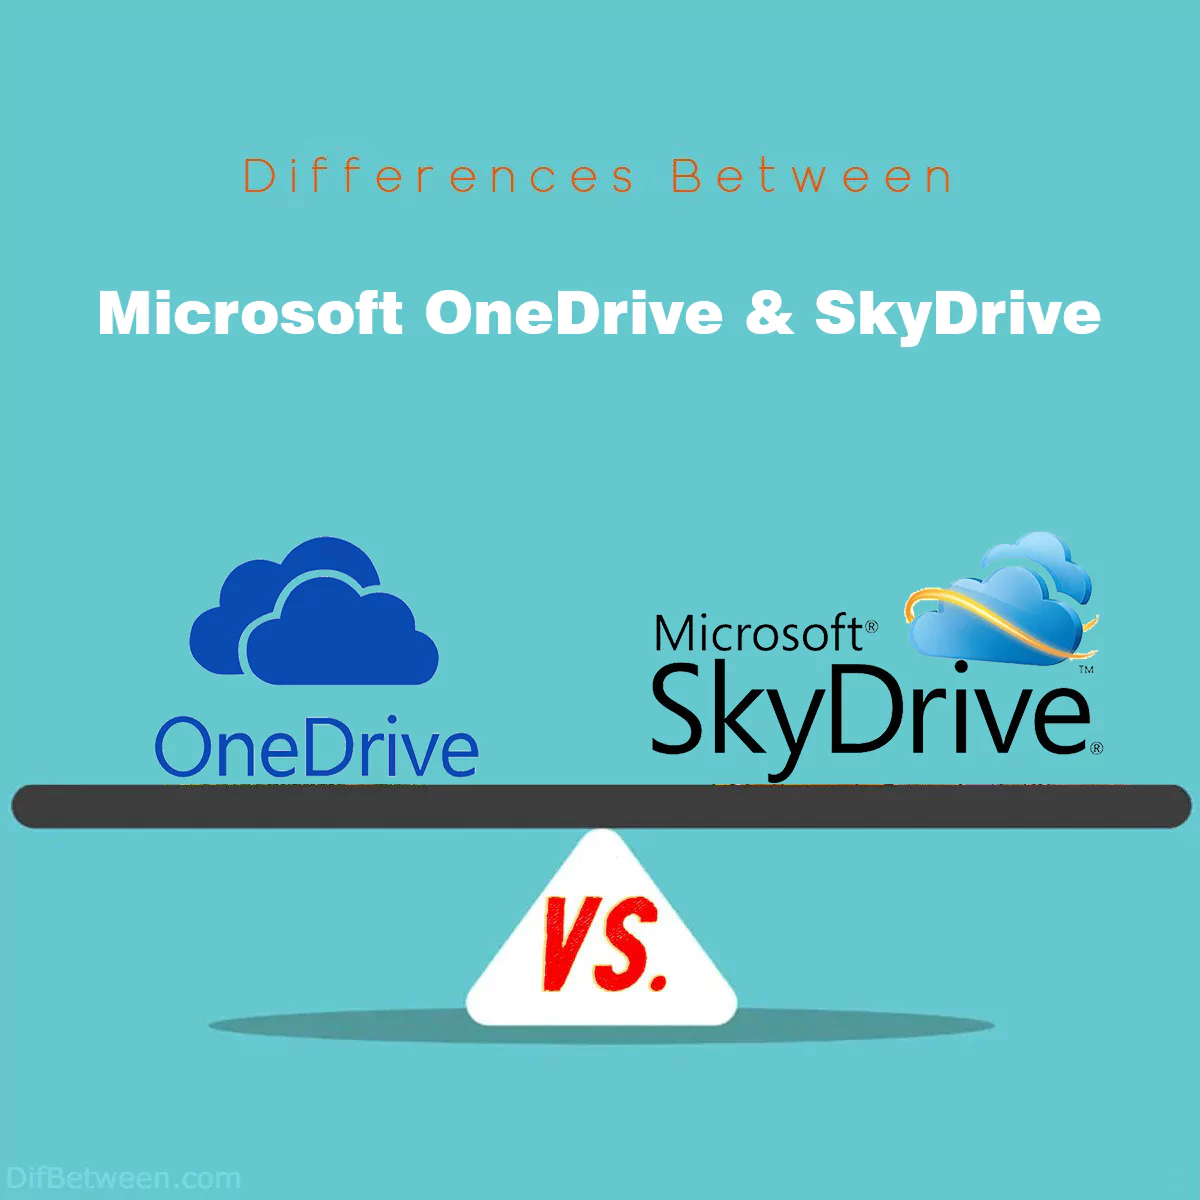 Differences Between Microsoft OneDrive and SkyDrive